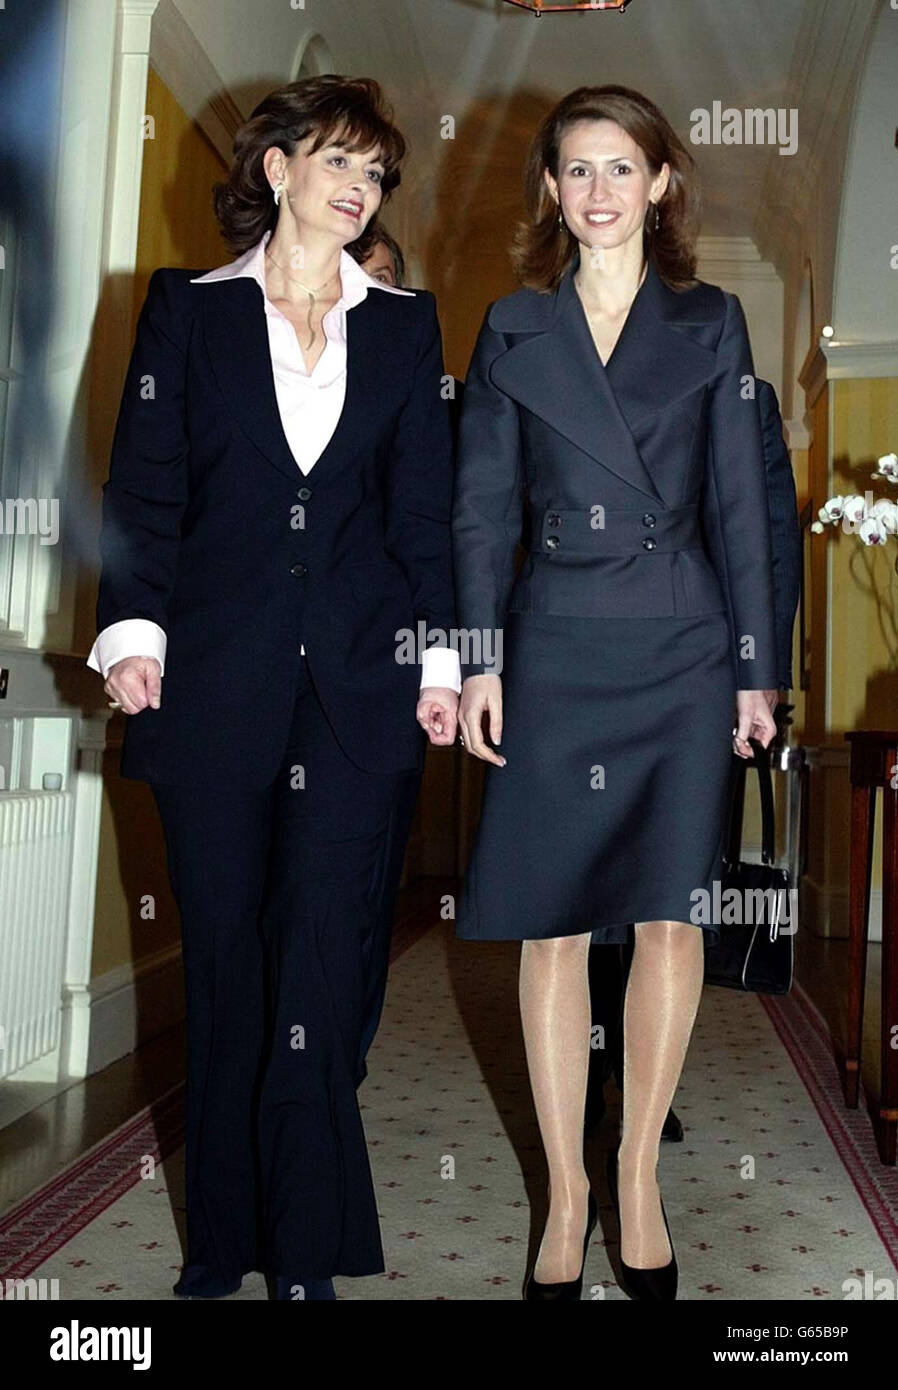 Cherie Blair (left), wife of British Prime Minister Tony Blair, escorts Asma Al-Assad, the wife of Syrian President Bashar Assad along a corridor inside 10 Downing Street at the start of Assad's official visit to Britain. Stock Photo